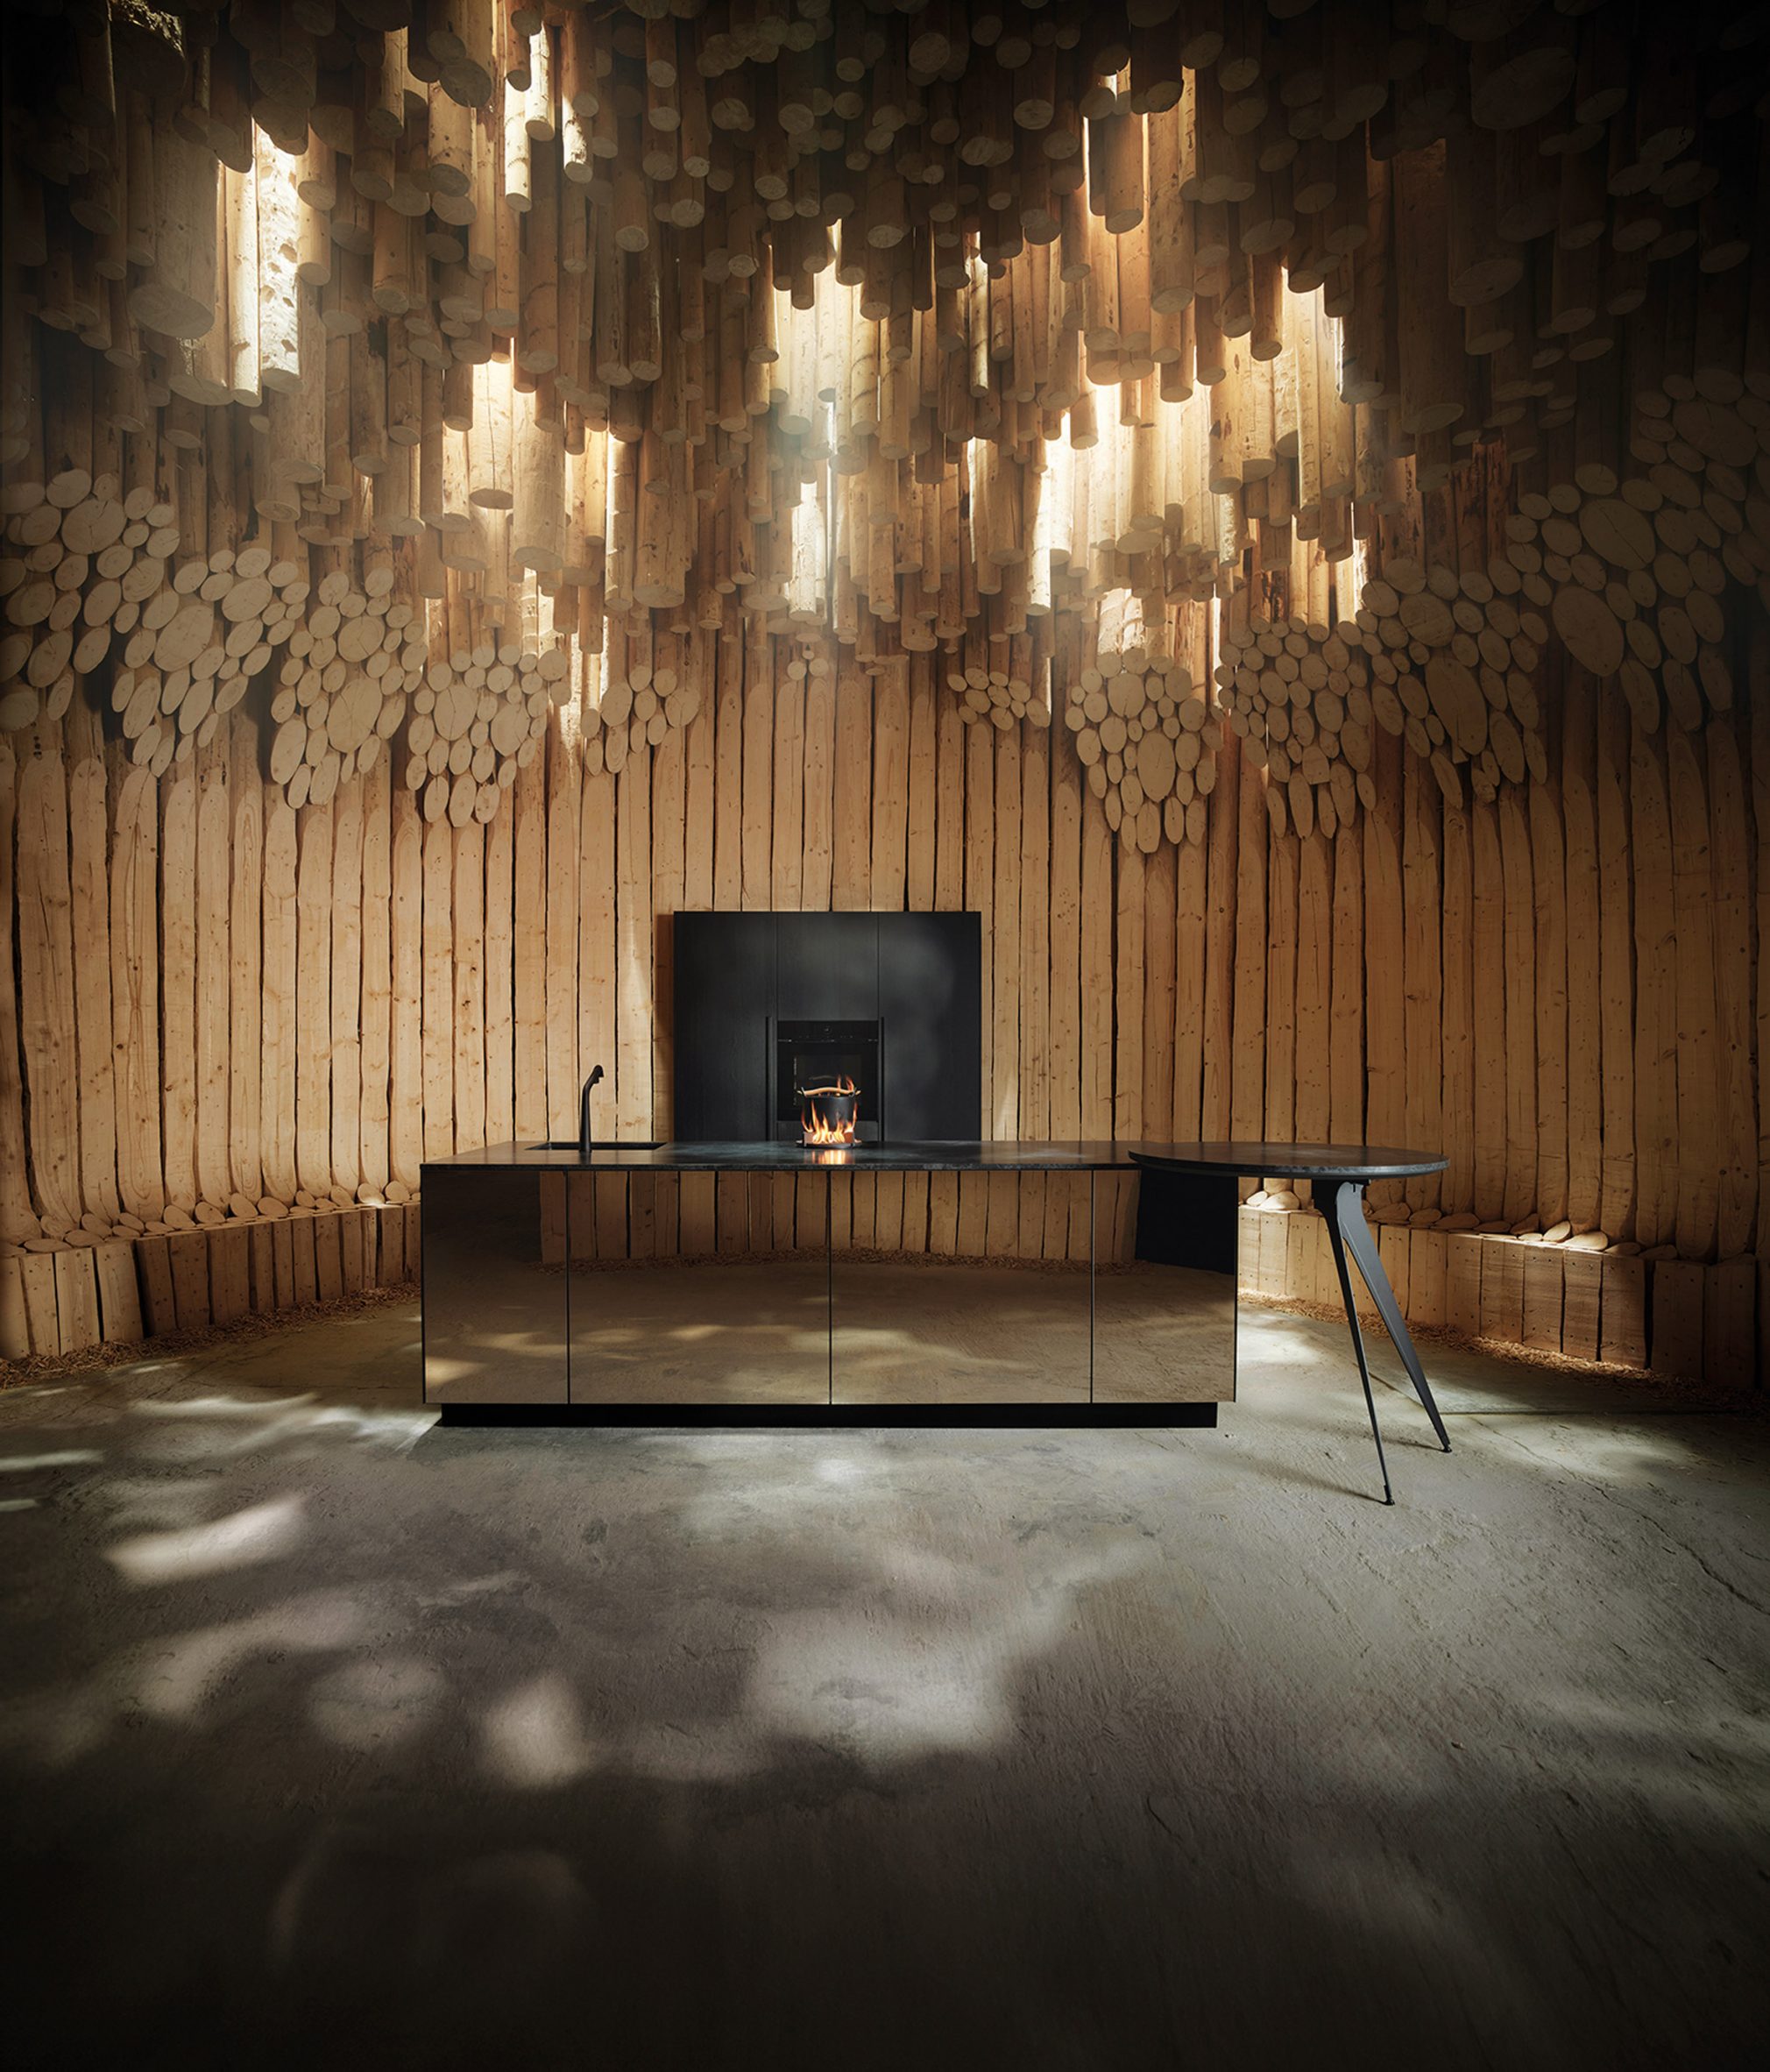 Interior view of The Fireplace exhibited at Milan design week